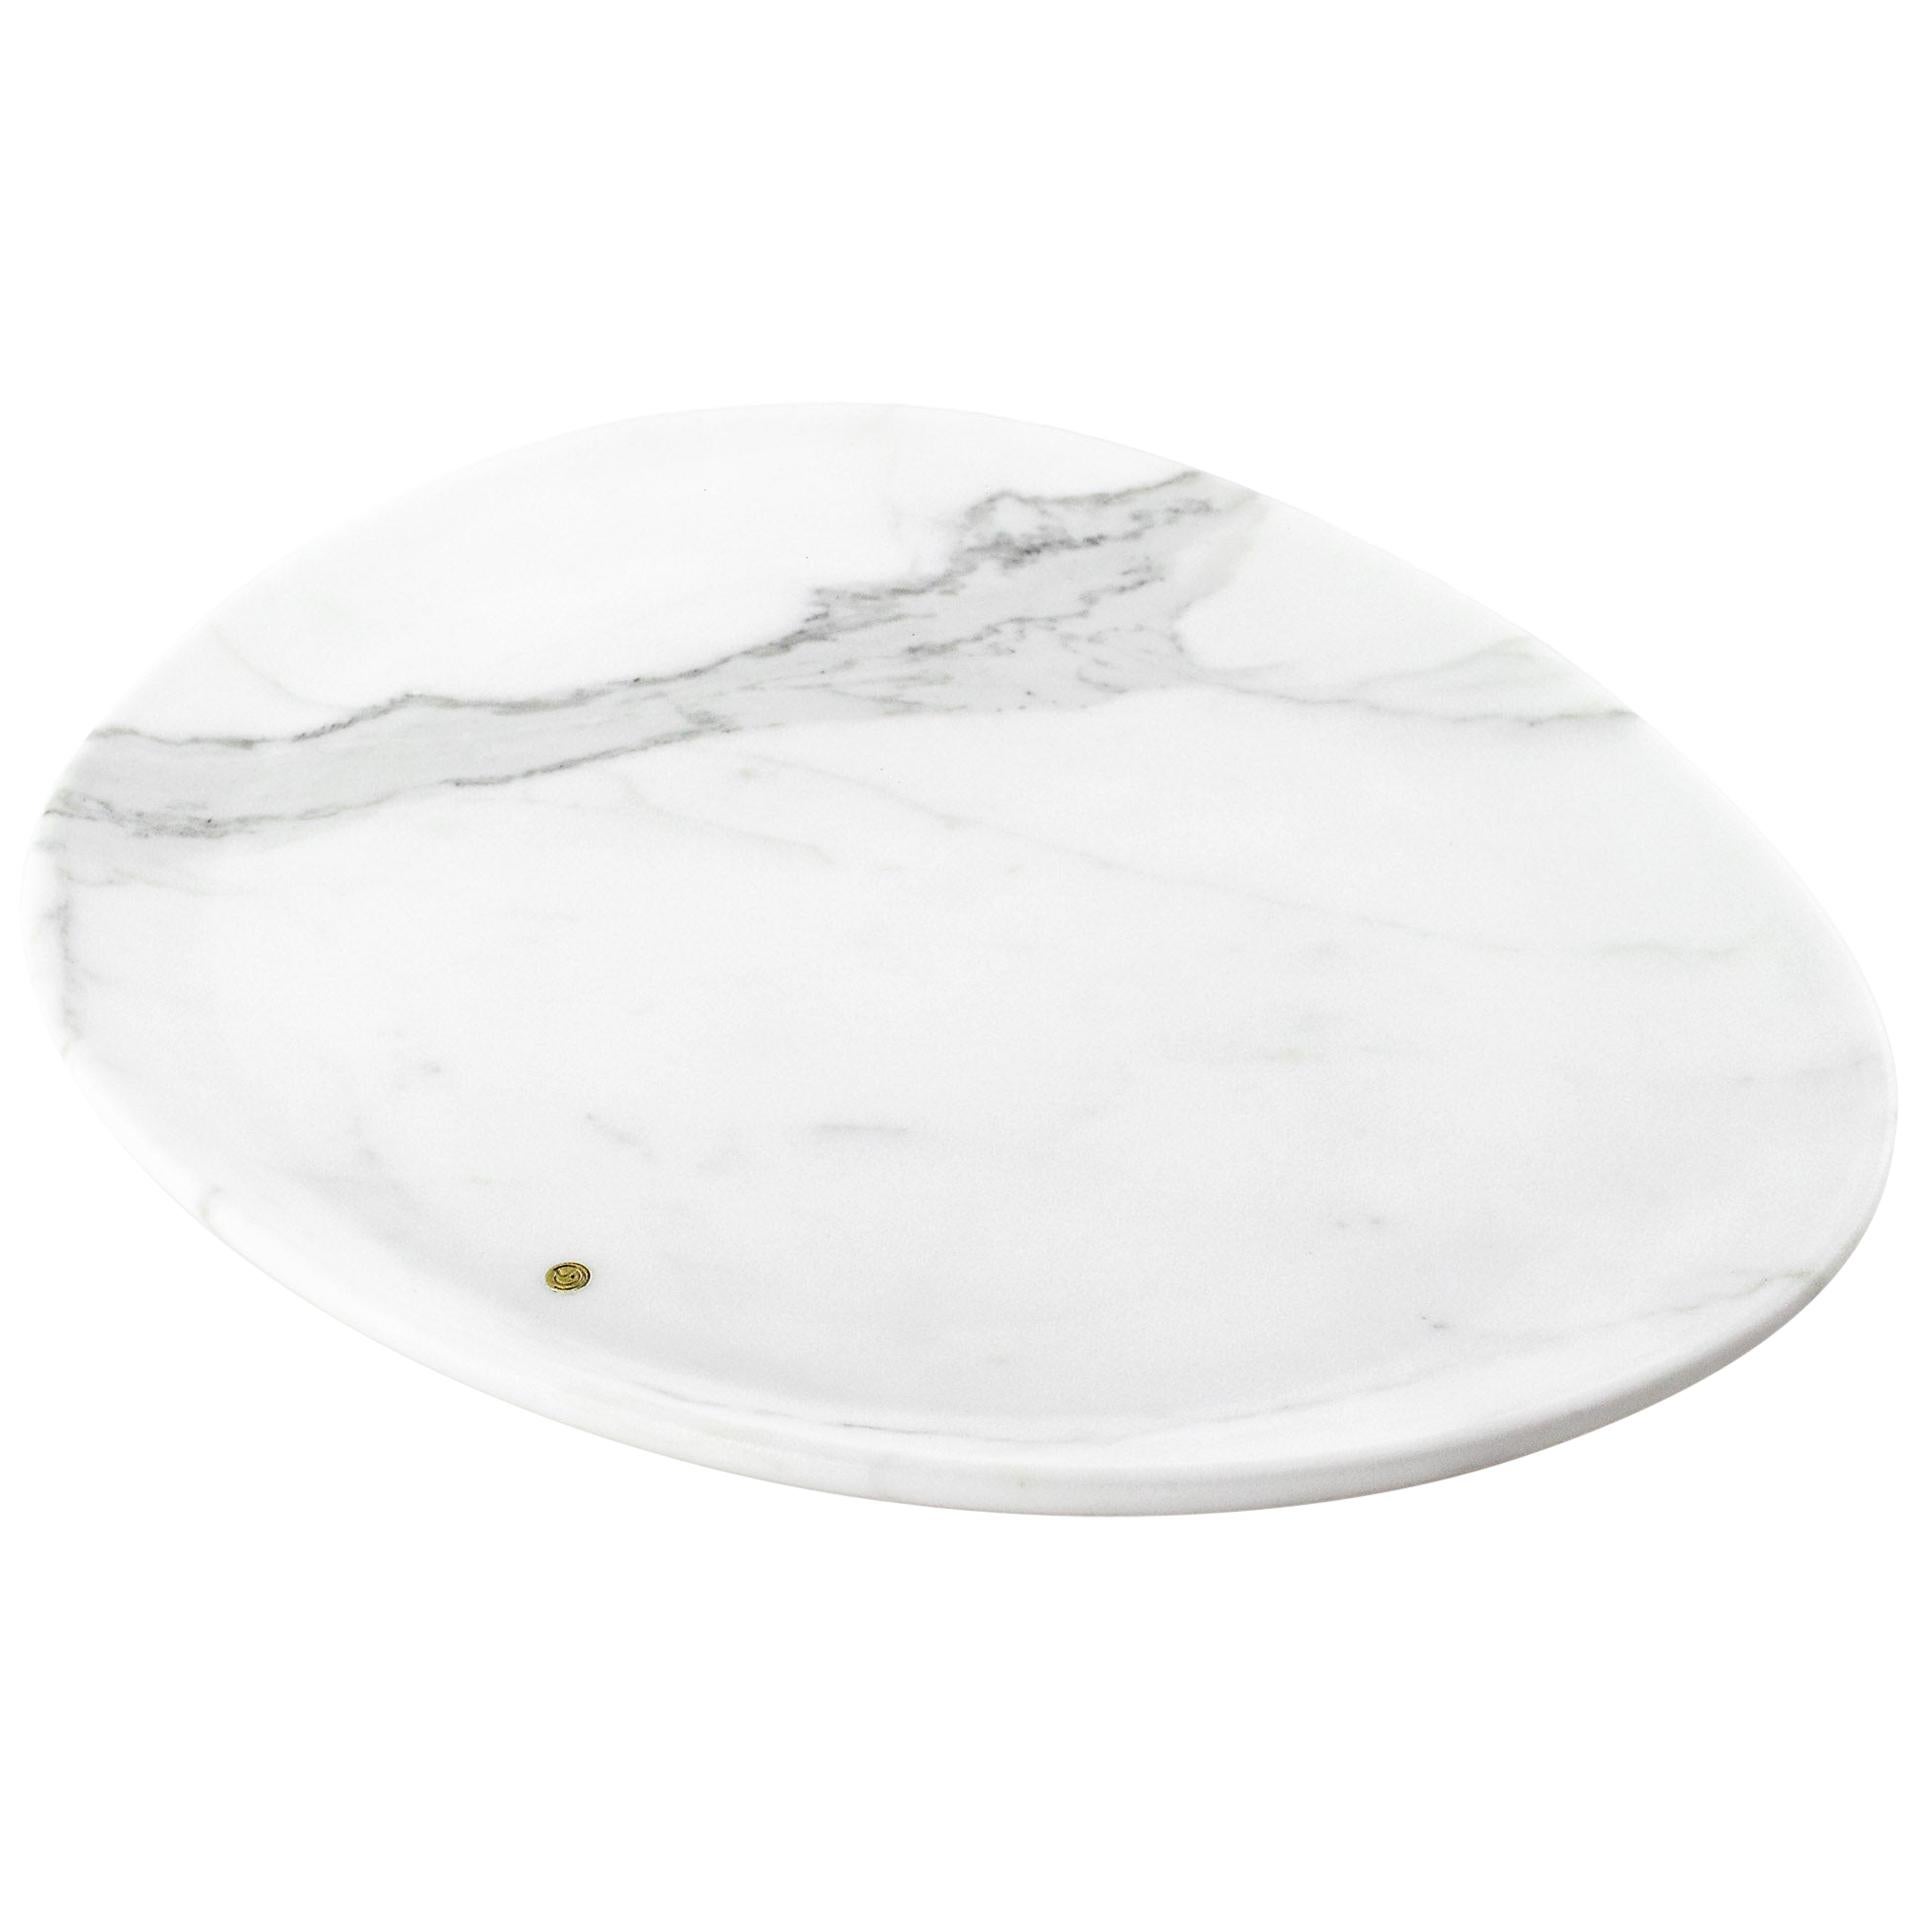 Plate Platter Serveware White Statuary Marble Collectible Design Italy Handmade